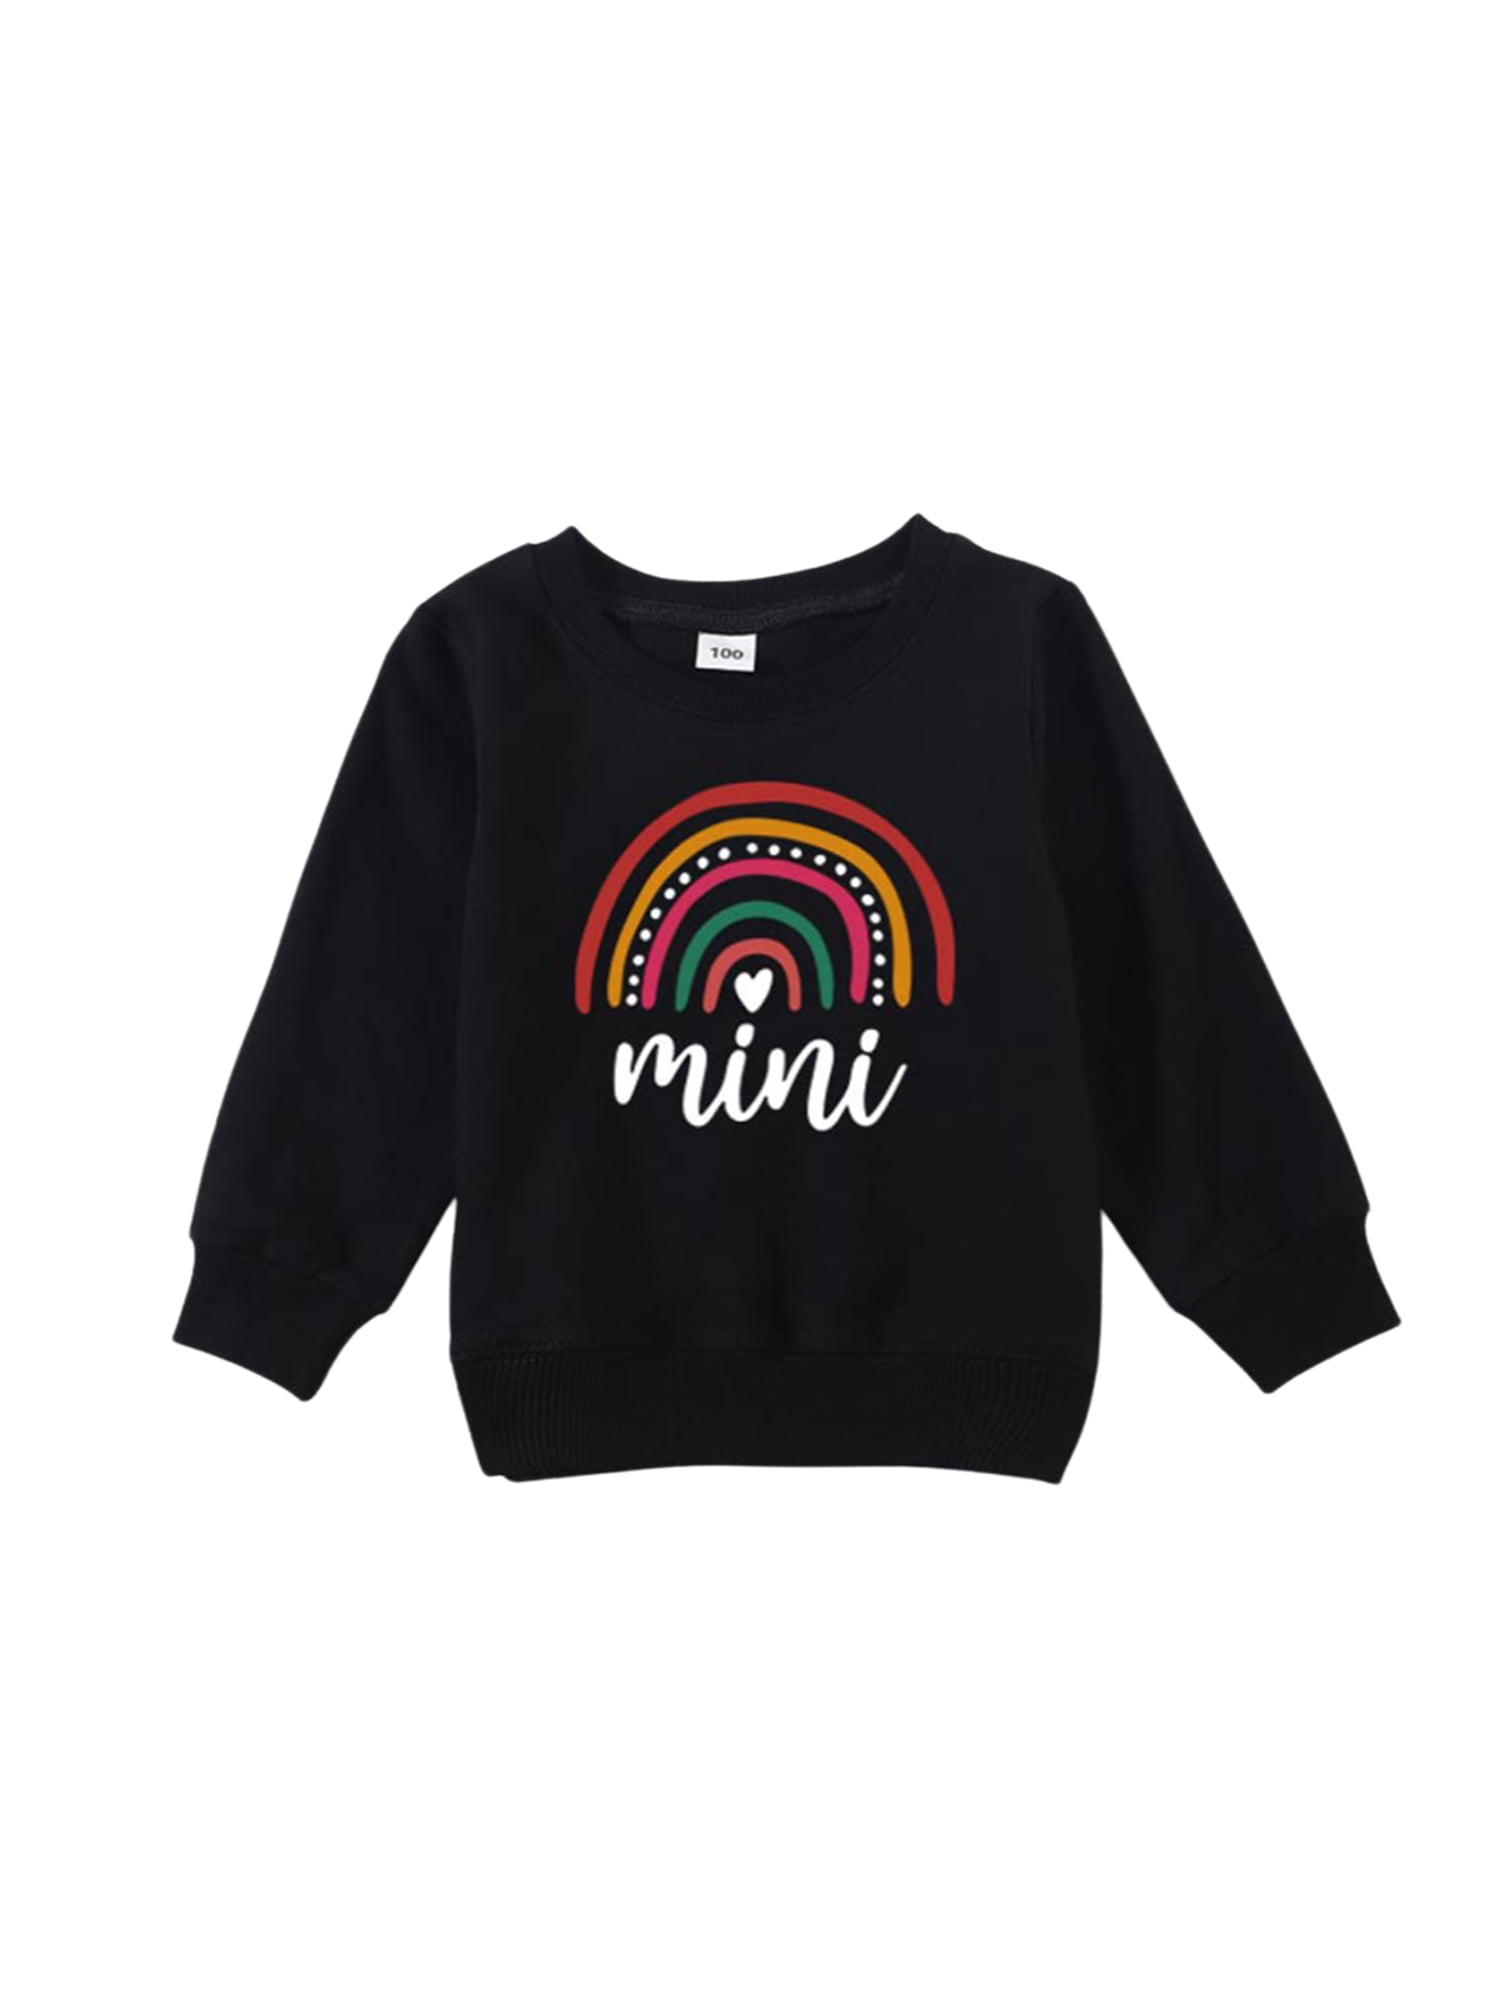 Mommy and Me Matching Outfits Rainbow Print Long Sleeve Shirt Top Family Matching Pullover Sweatshirts